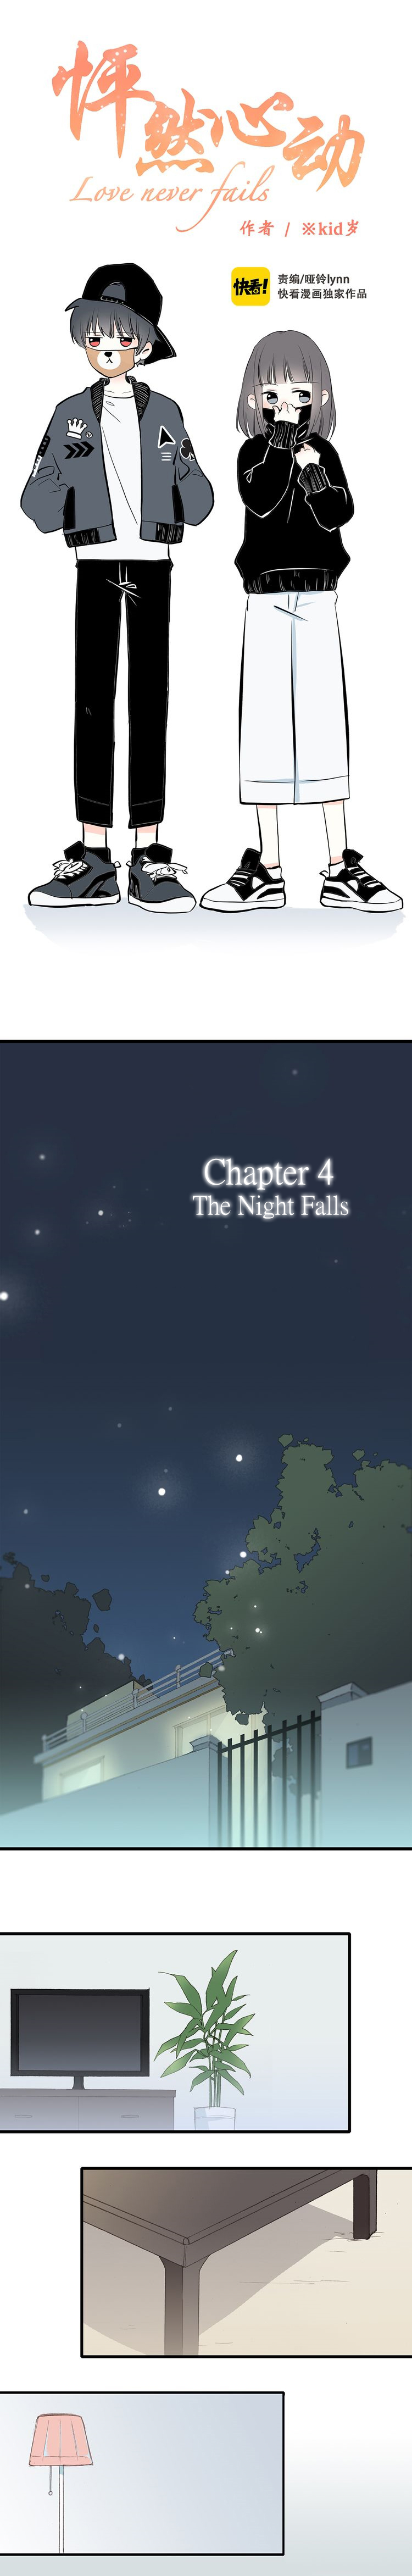 Love Never Fails Ch. 4 The Night Falls